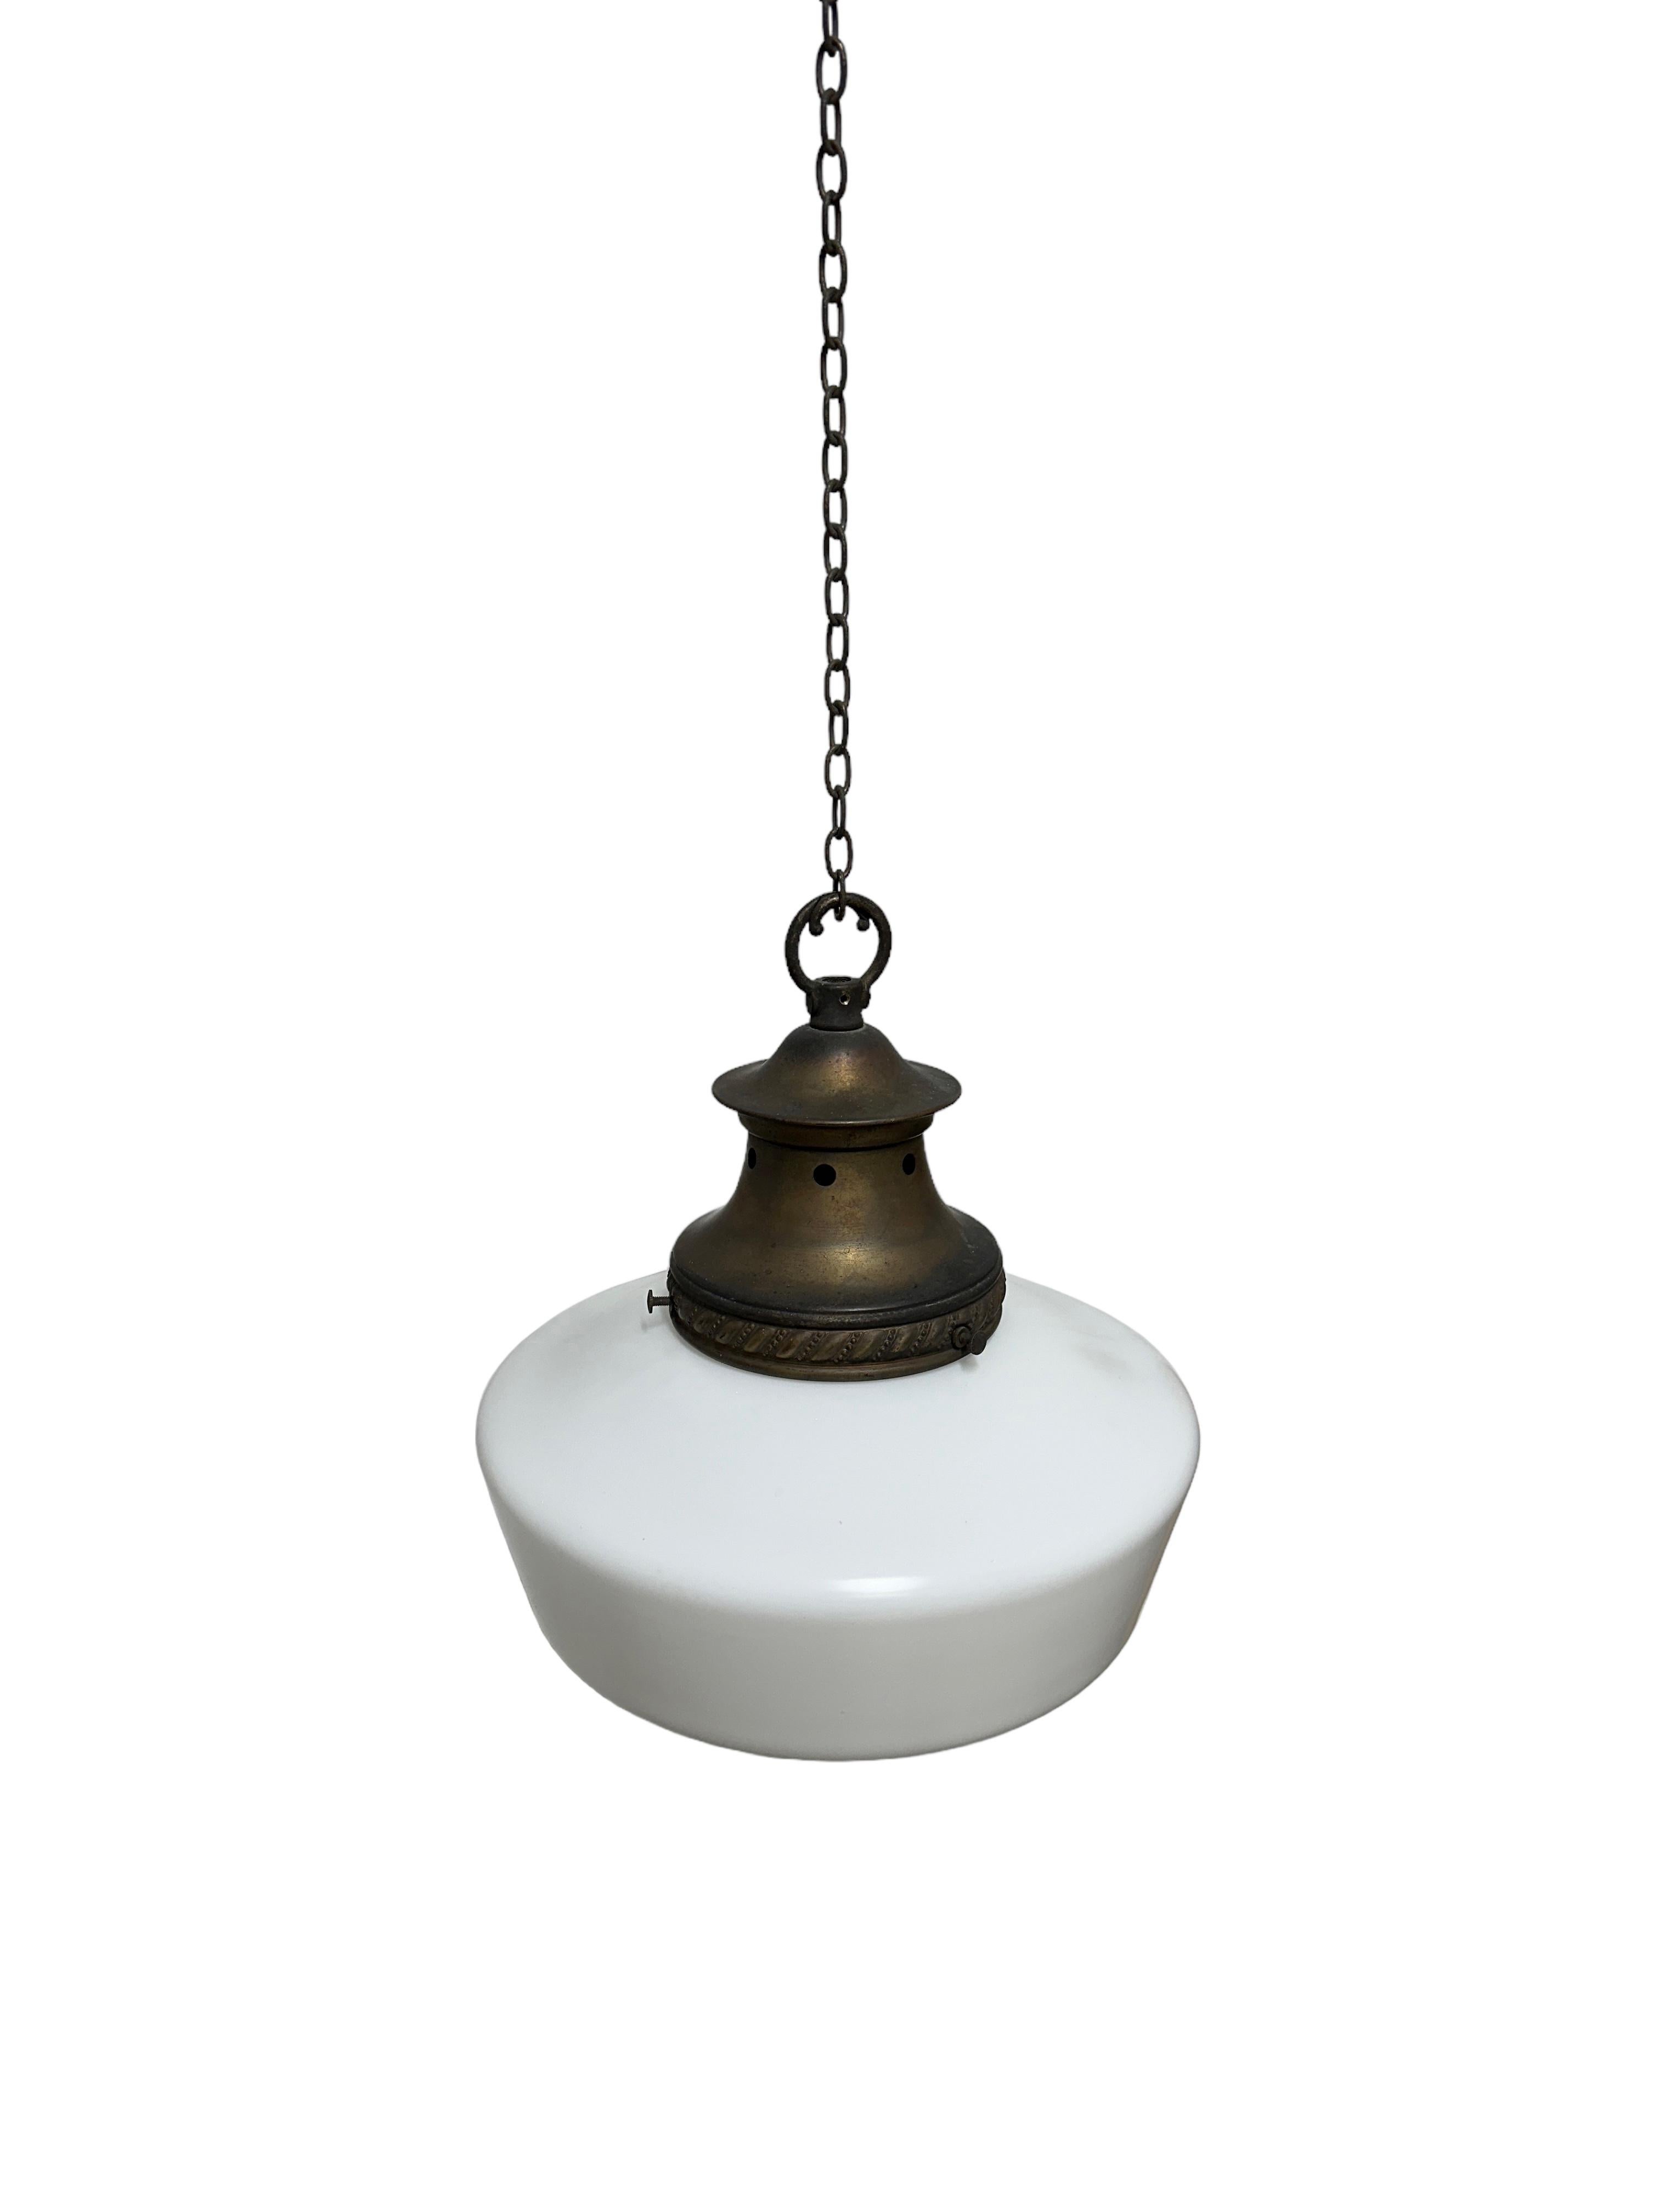 Run Set Antique Vintage Church Satin Opaline Milk Glass Ceiling Pendants Light In Good Condition For Sale In Sale, GB